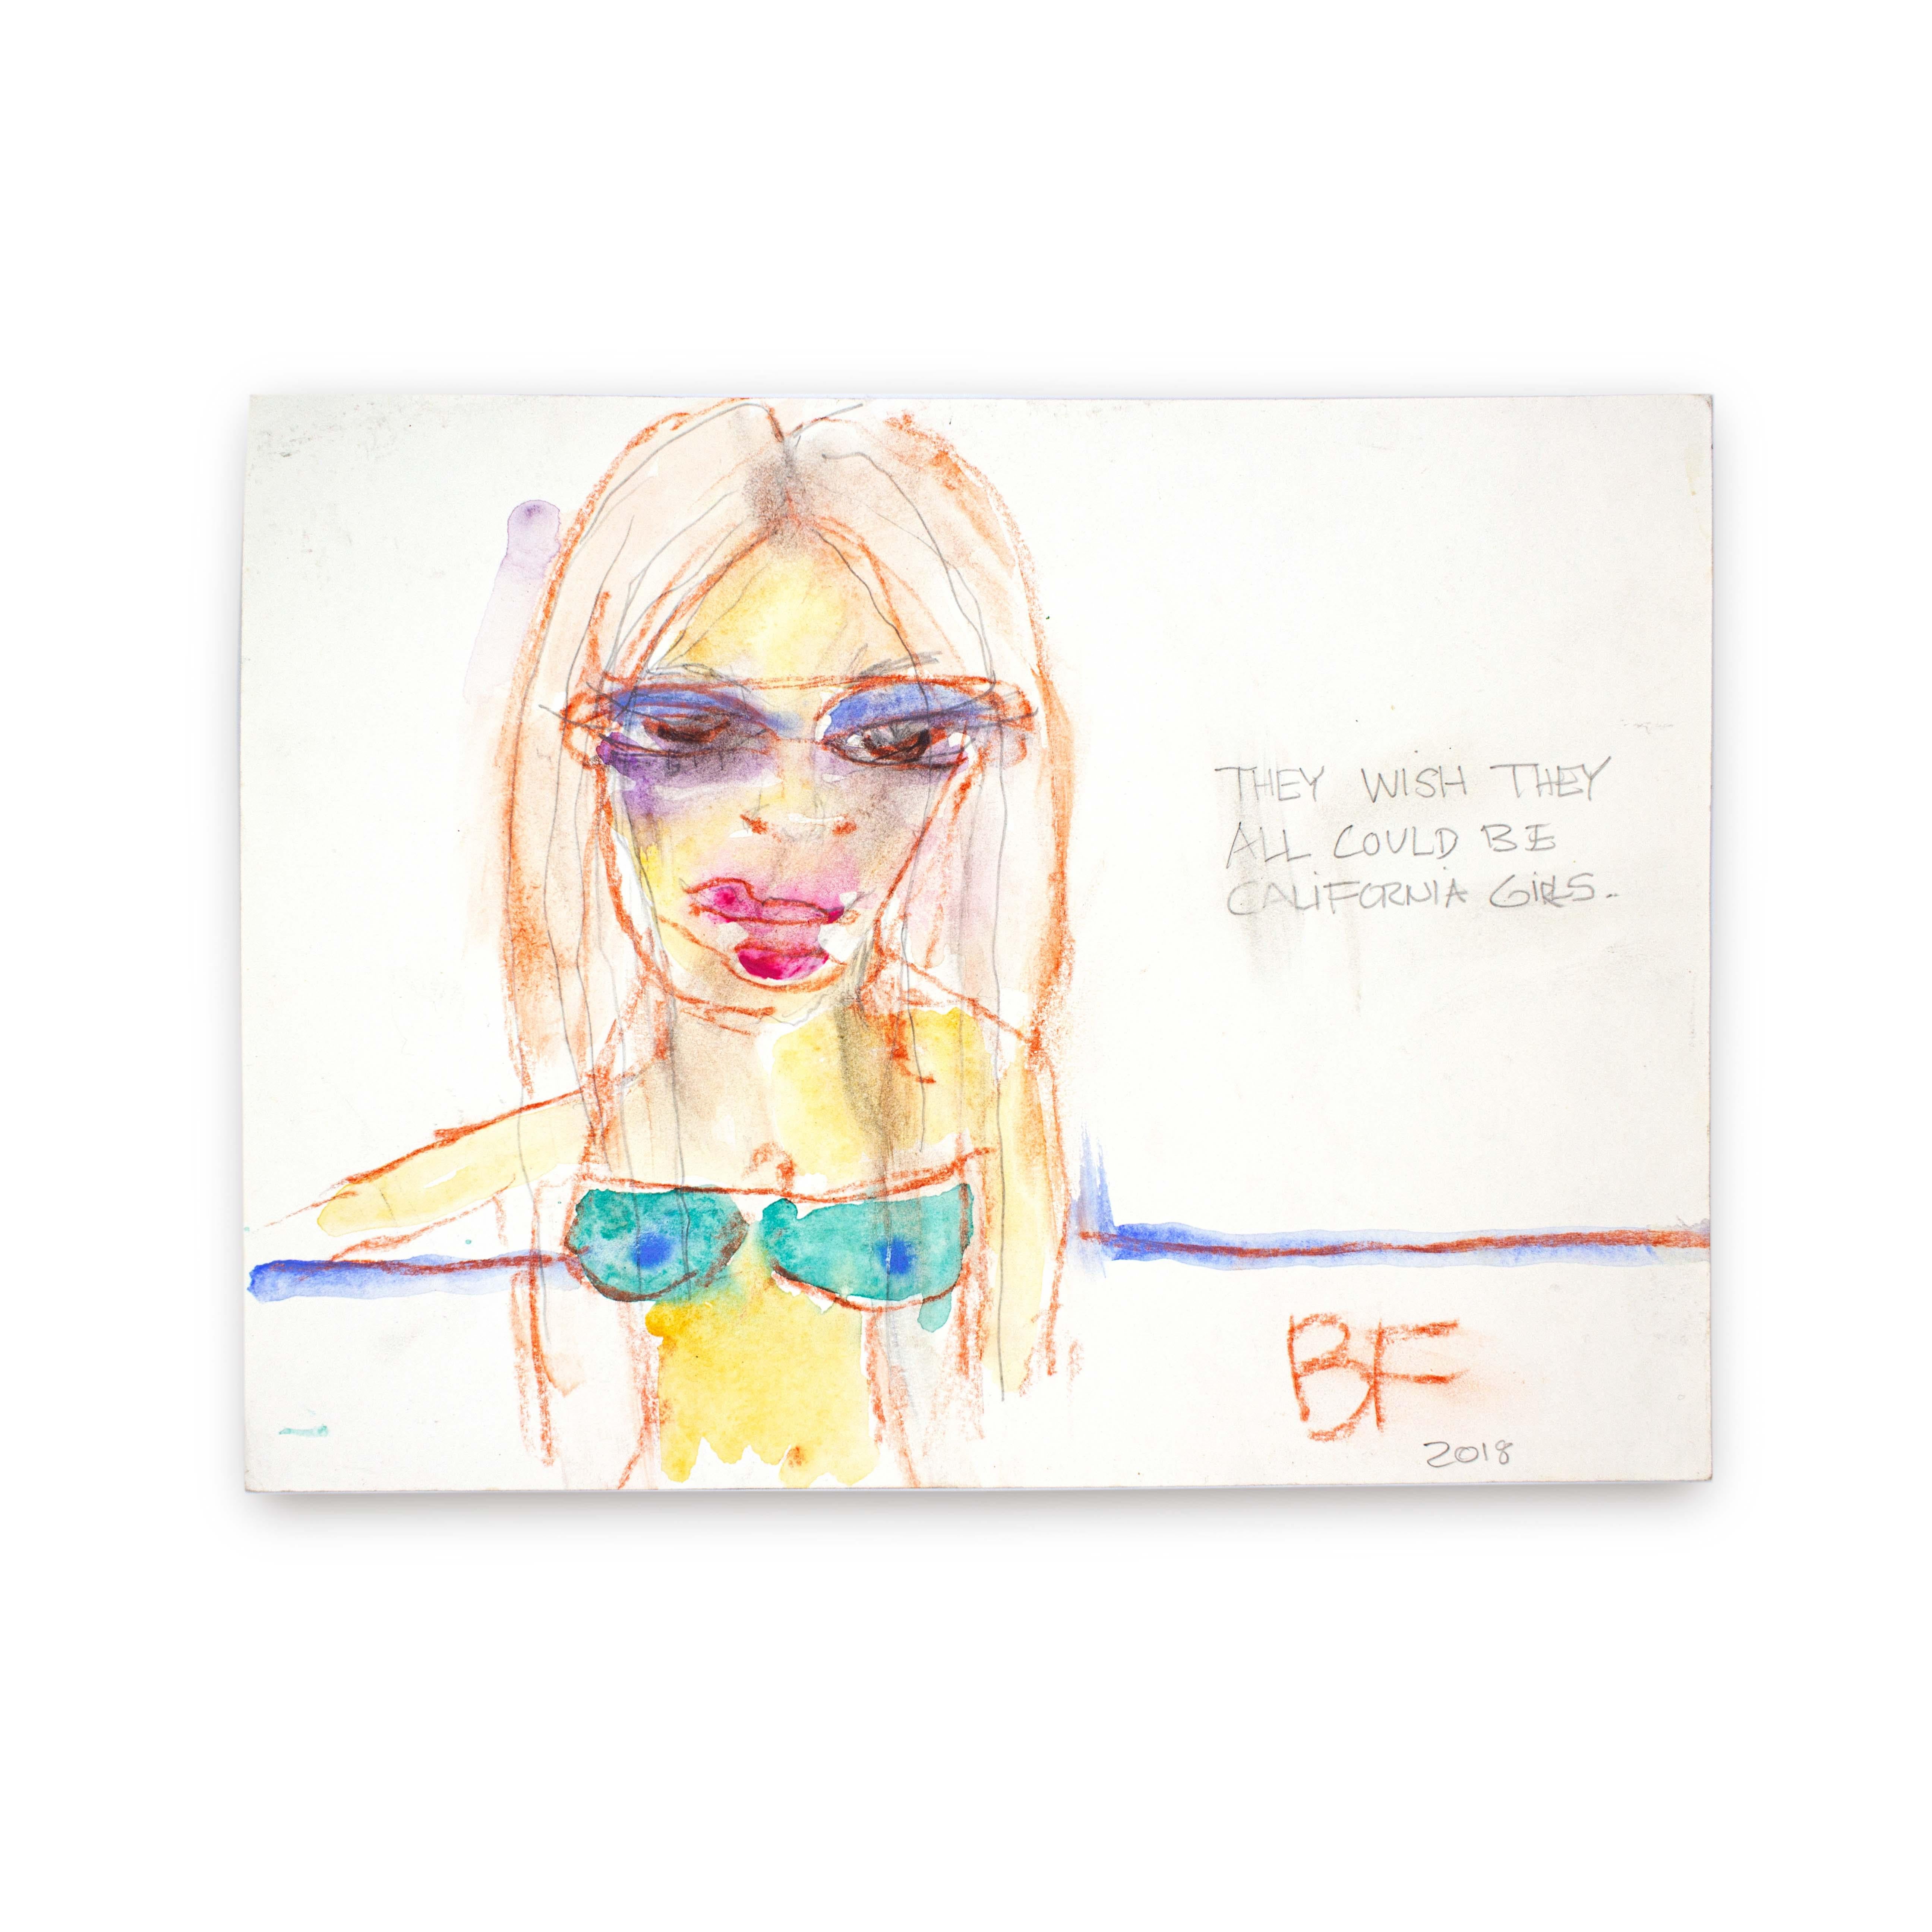 "California Girls" Mixed Media on Paper by Brad Fisher, REP by Tuleste Factory